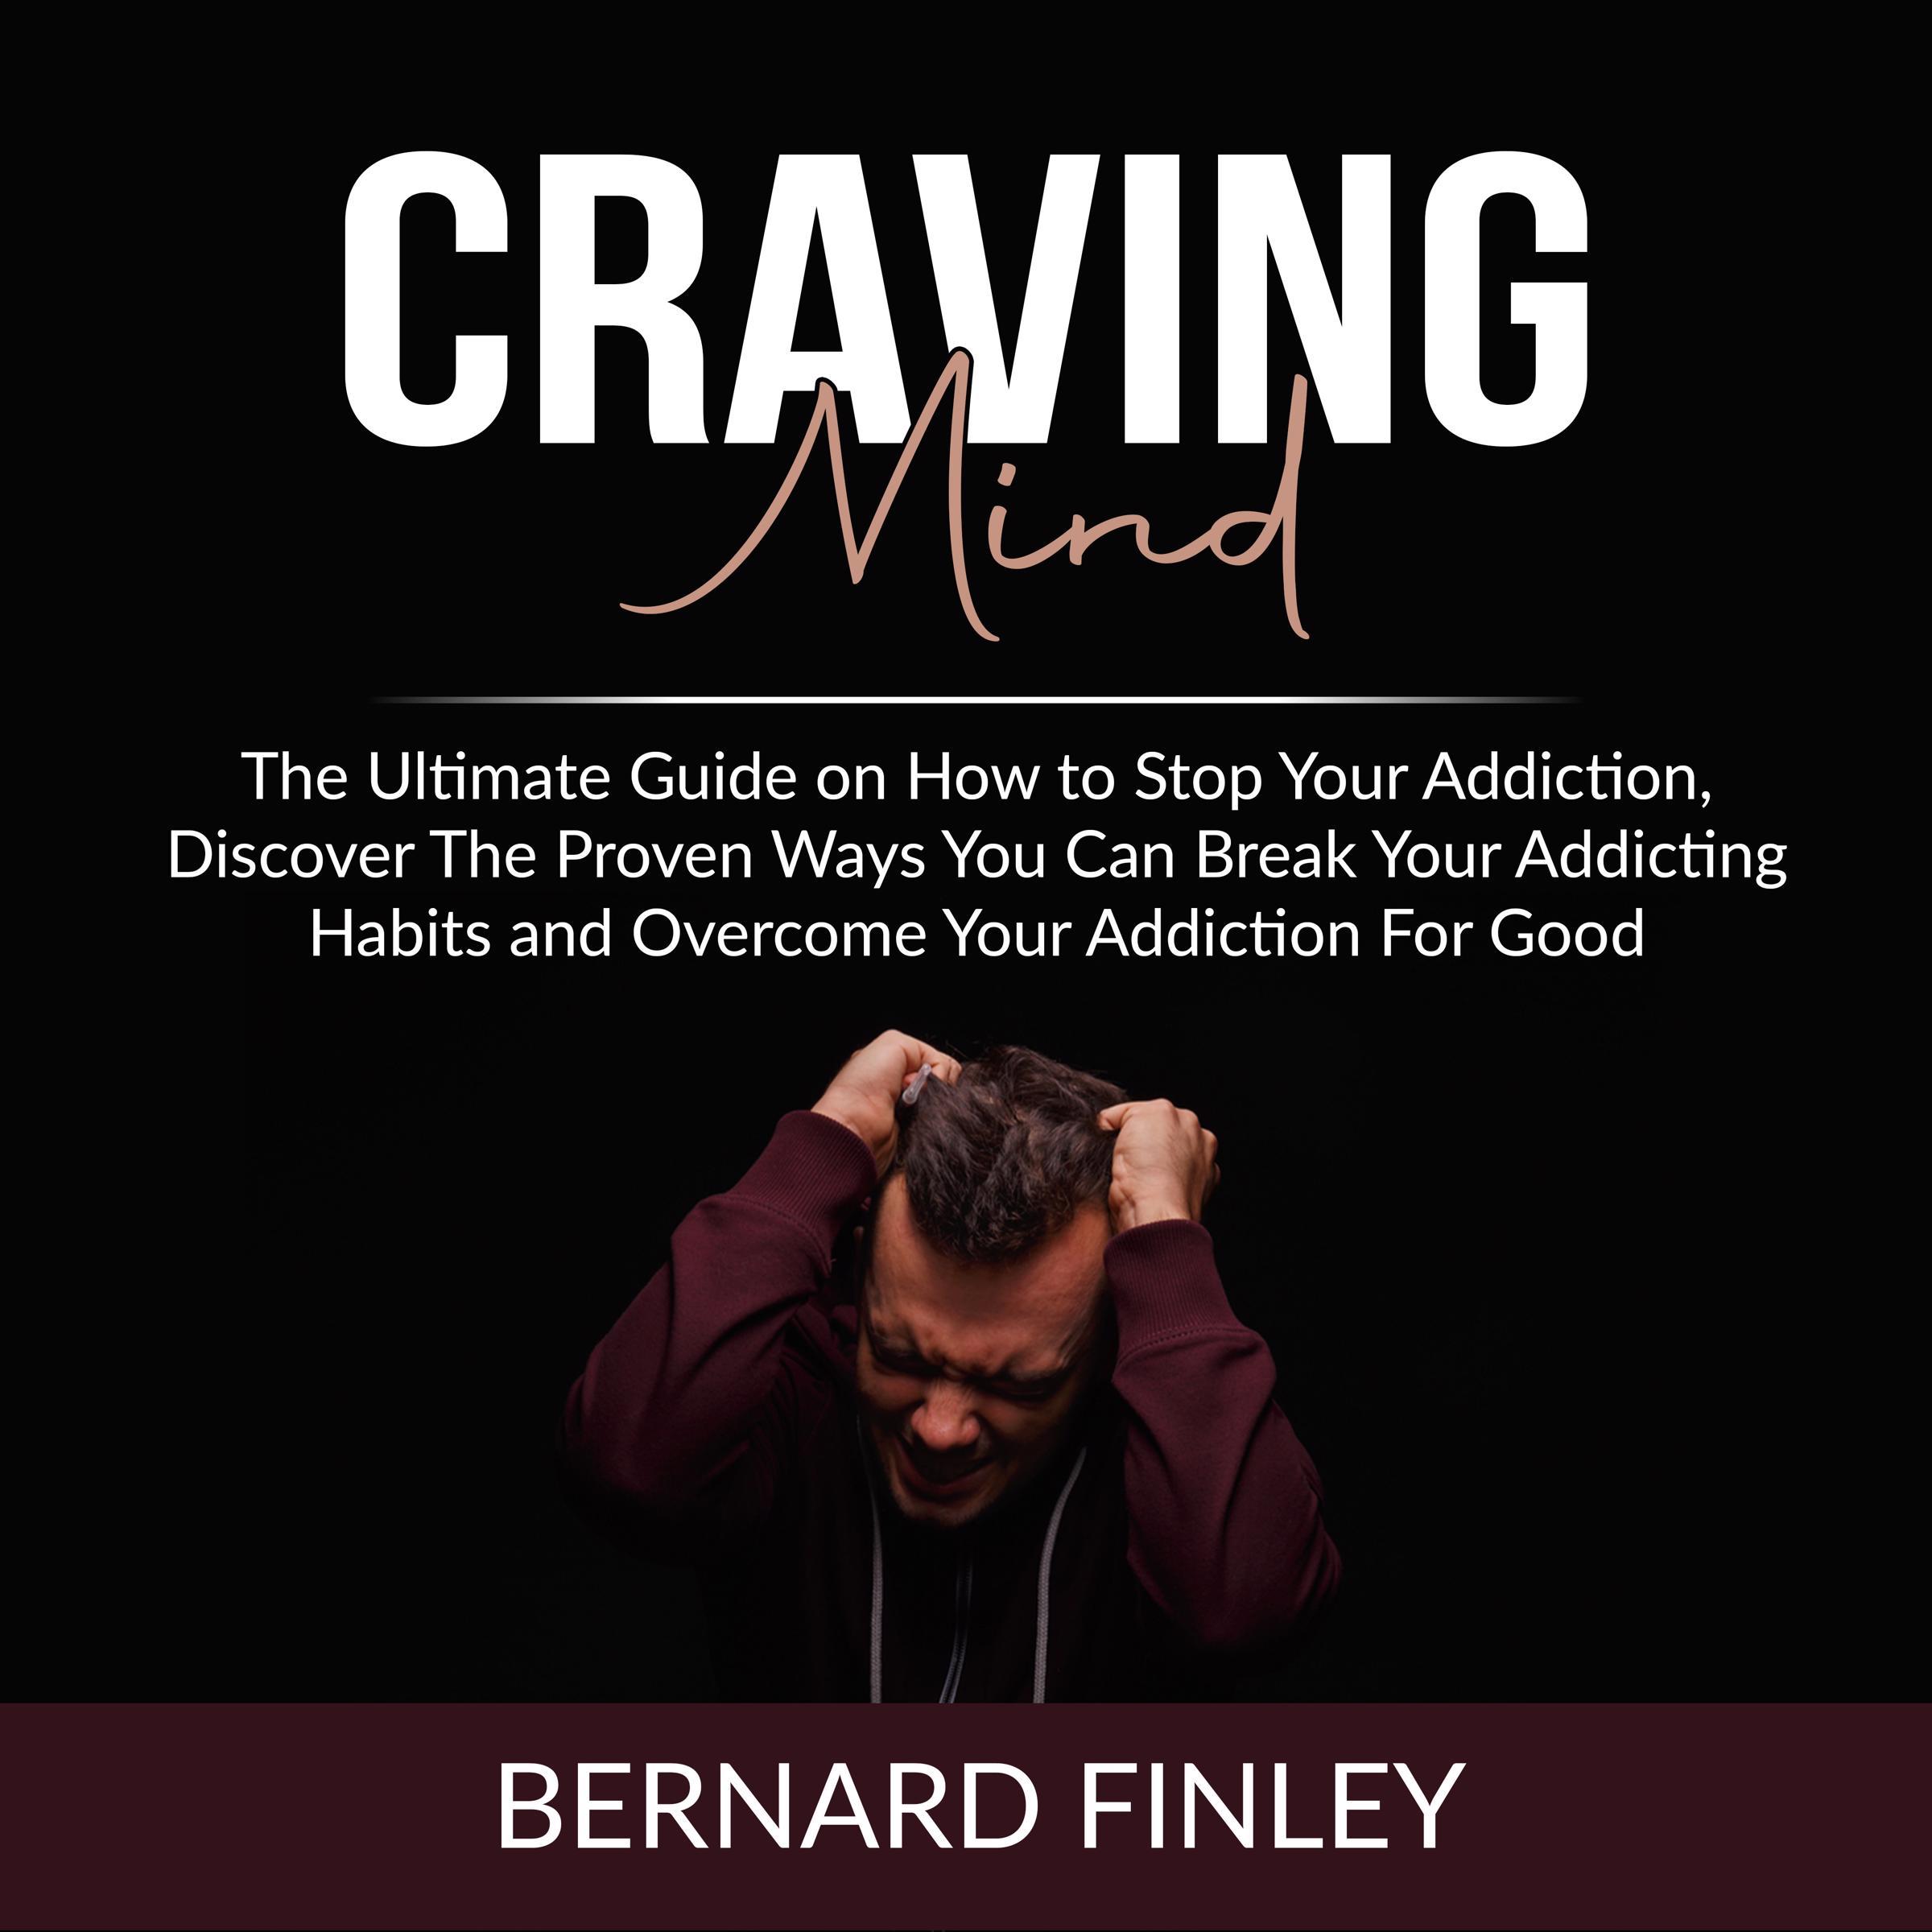 Craving Mind: The Ultimate Guide on How to Stop Your Addiction, Discover The Proven Ways You Can Break Your Addicting Habits and Overcome Your Addiction For Good